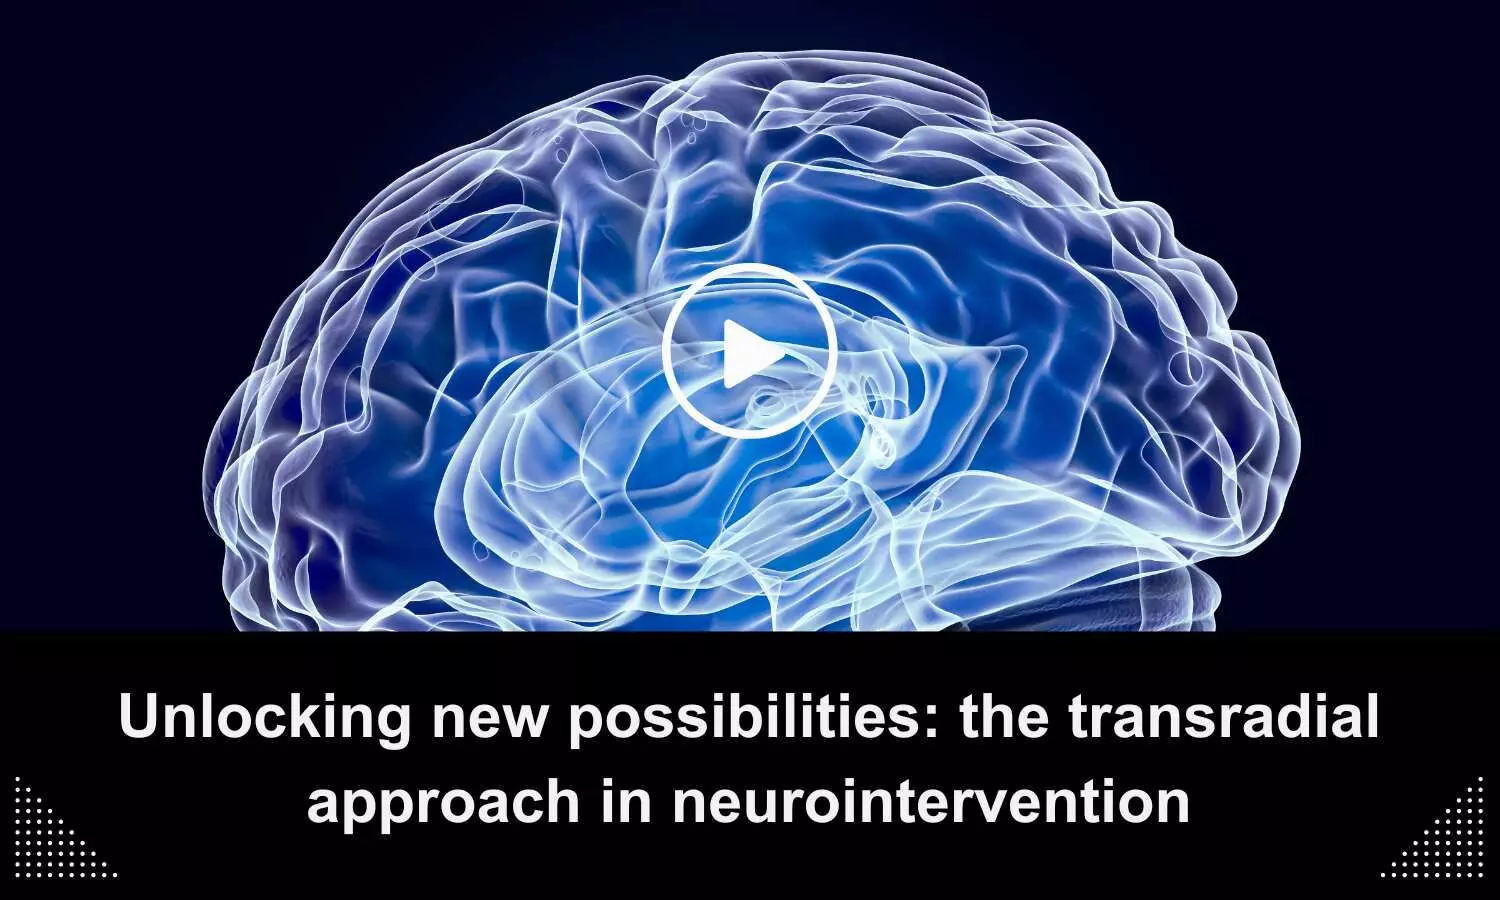 Unlocking New Possibilities: The Transradial Approach in Neurointervention